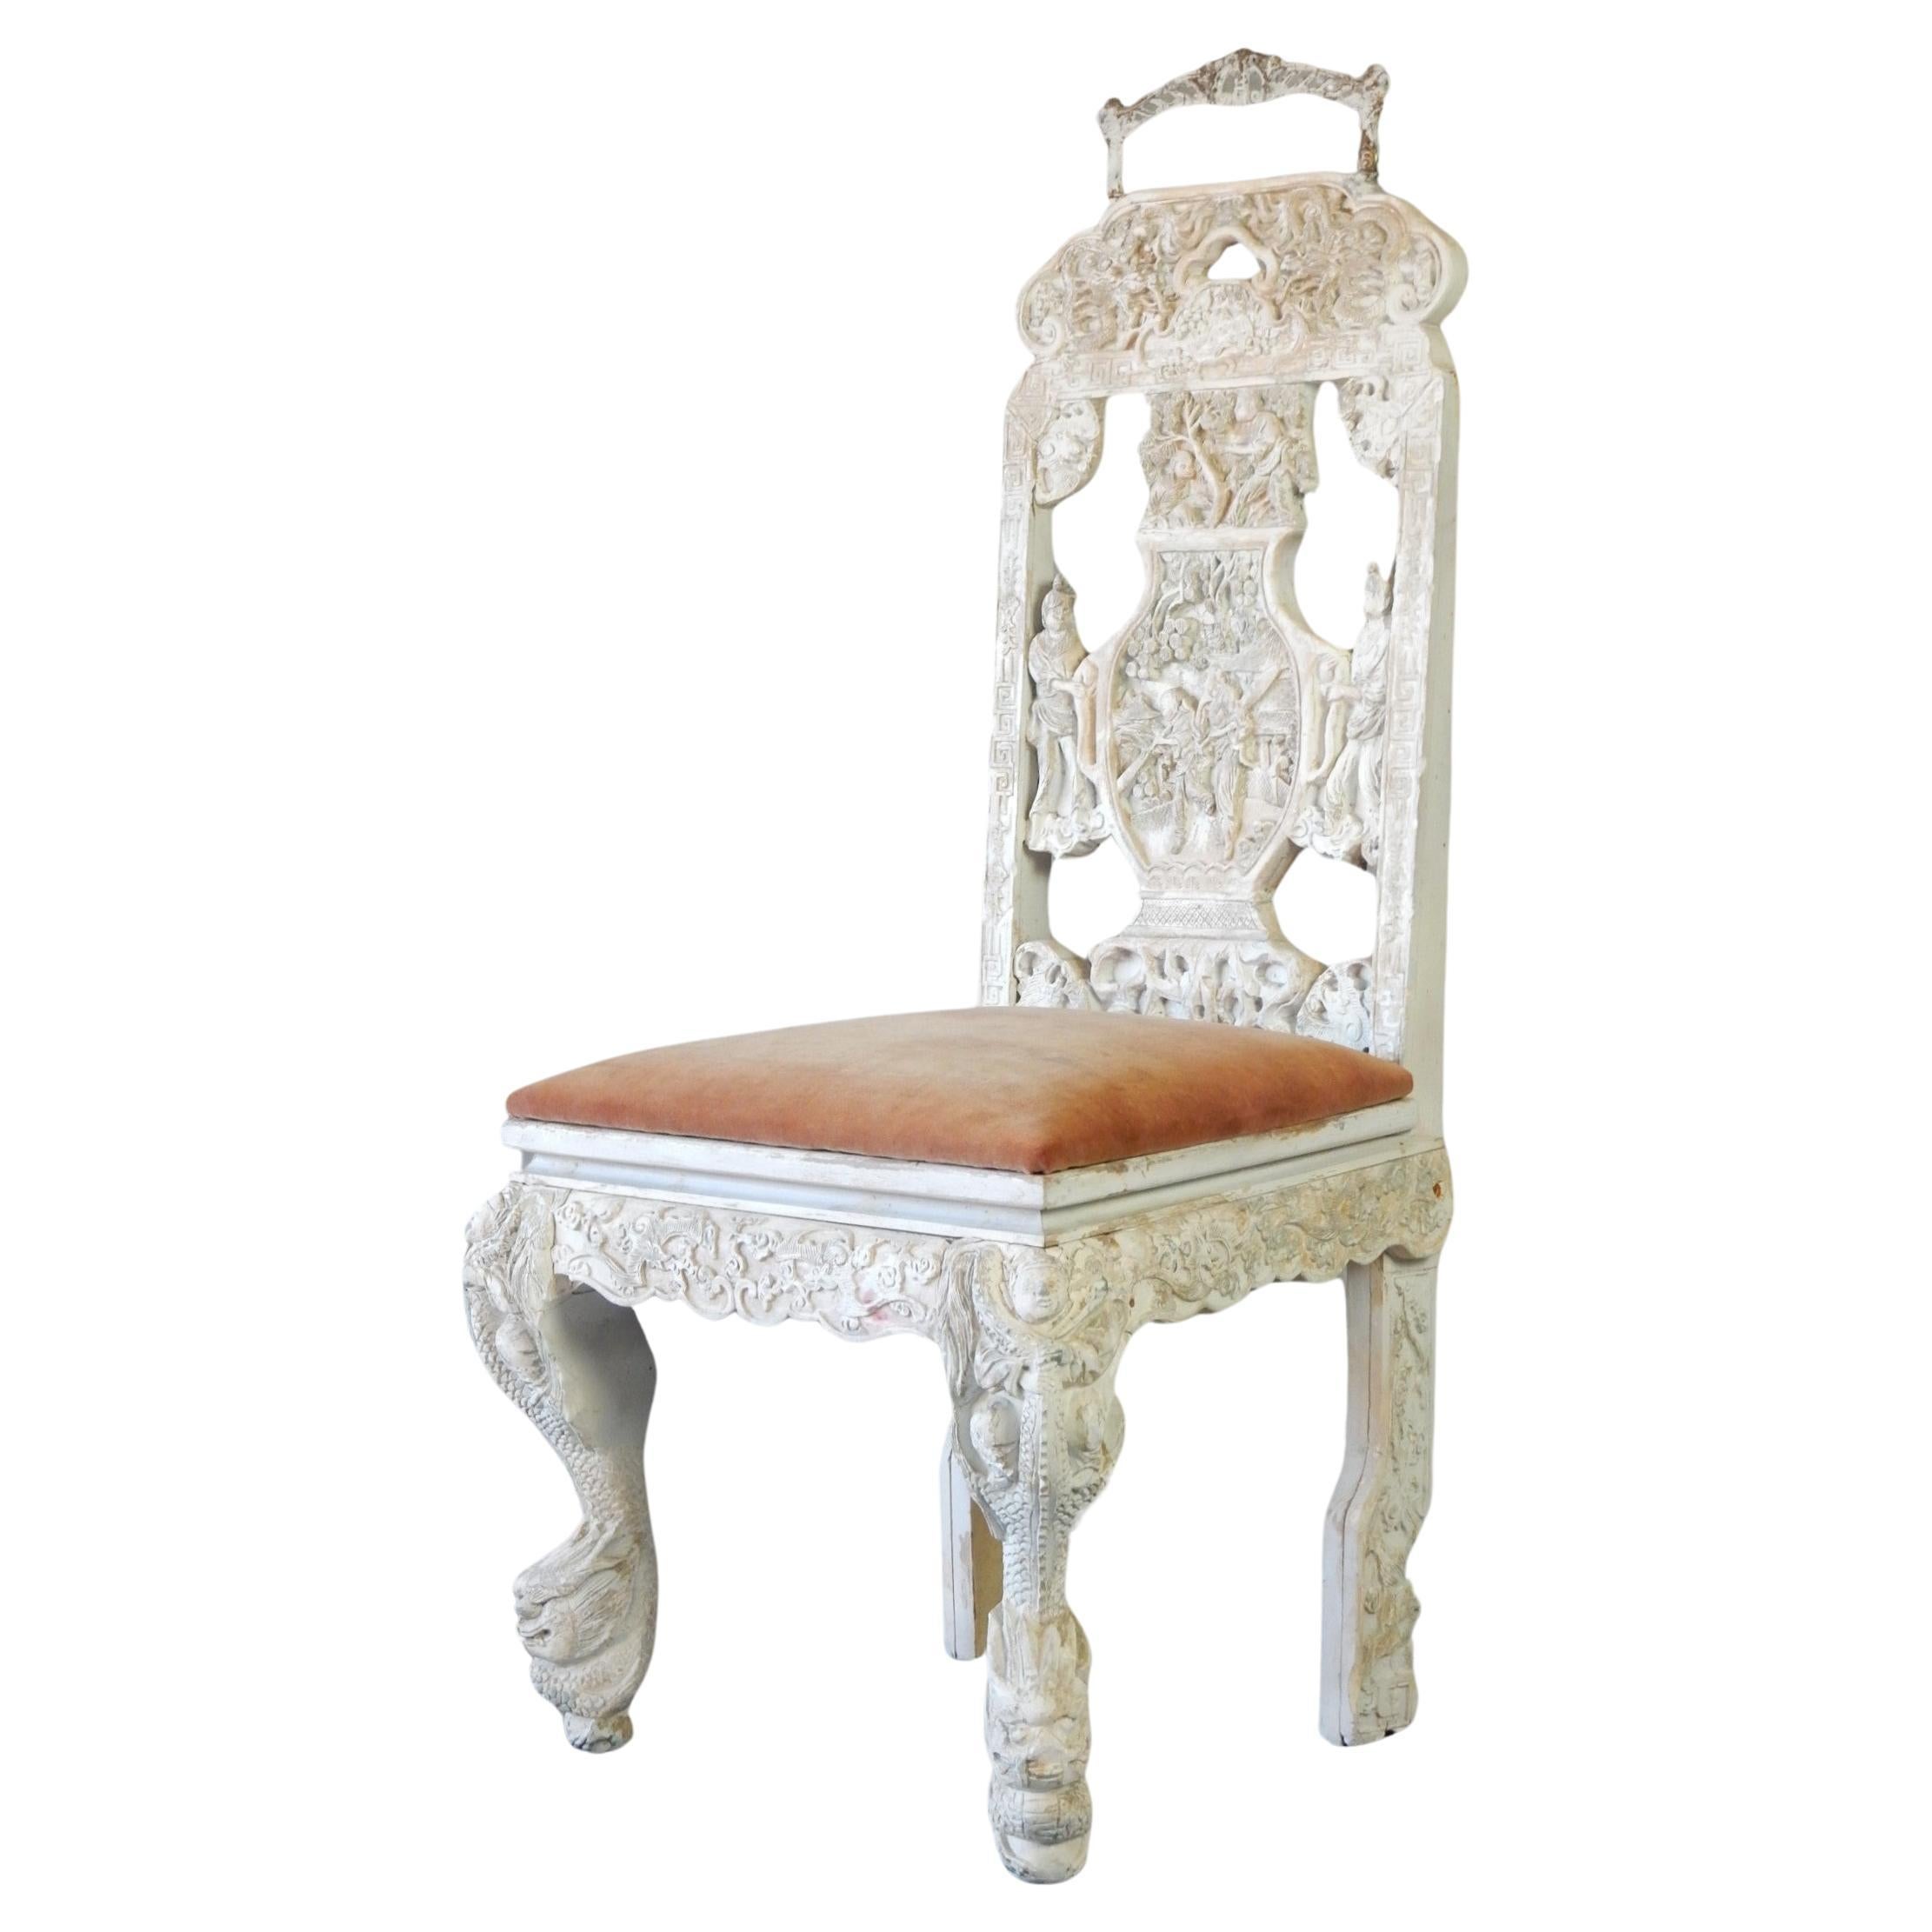 Victorian Chinoiserie era Molded Plaster Chaise Percée Commode Chair 